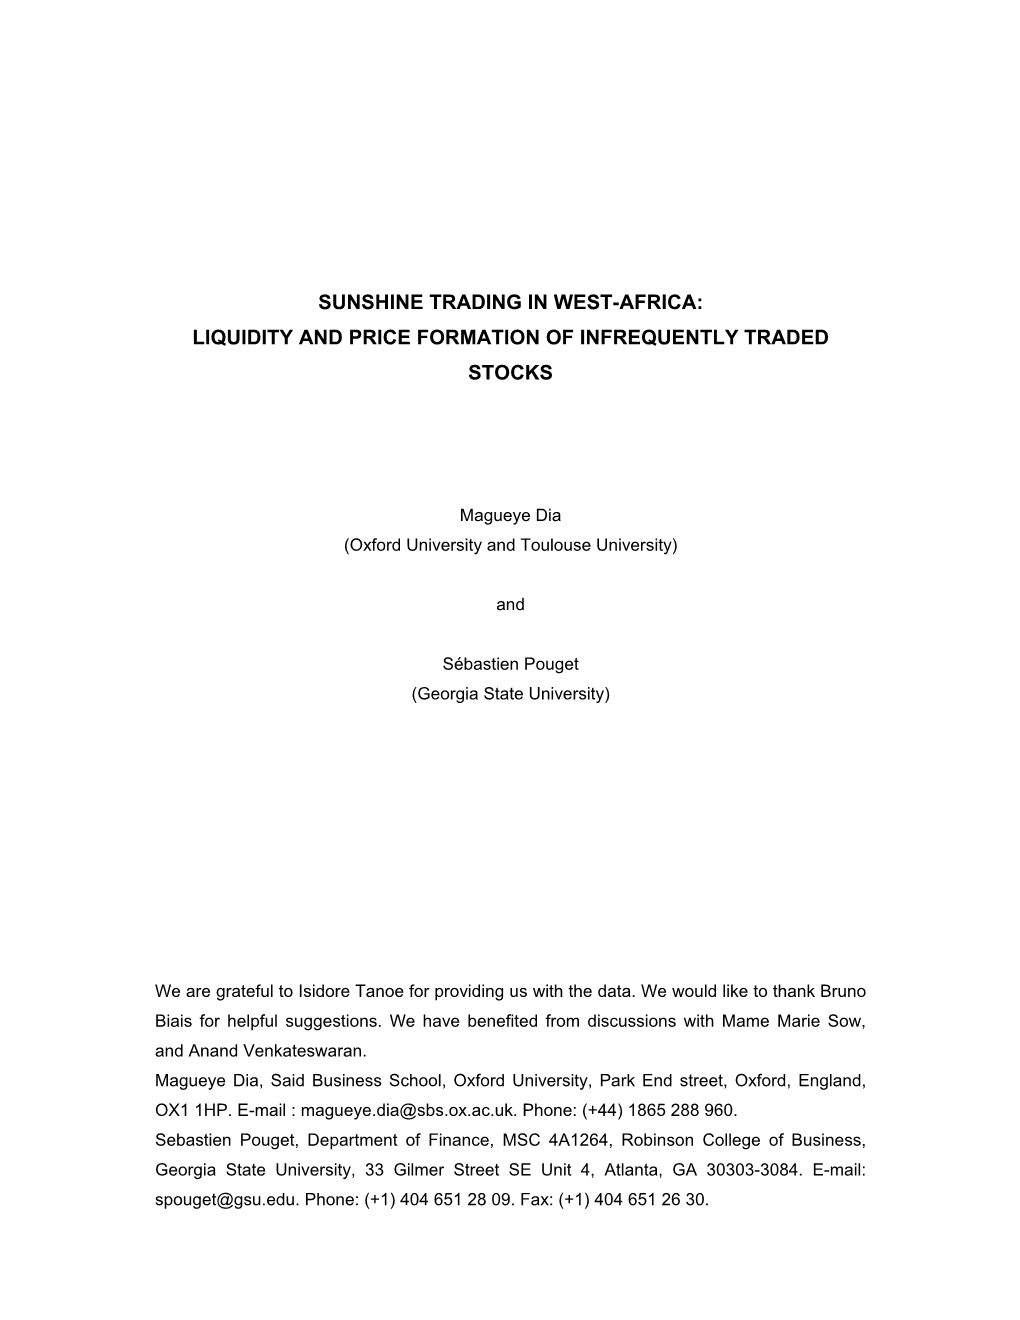 Liquidity and Price Formation of Infrequently Traded Stocks